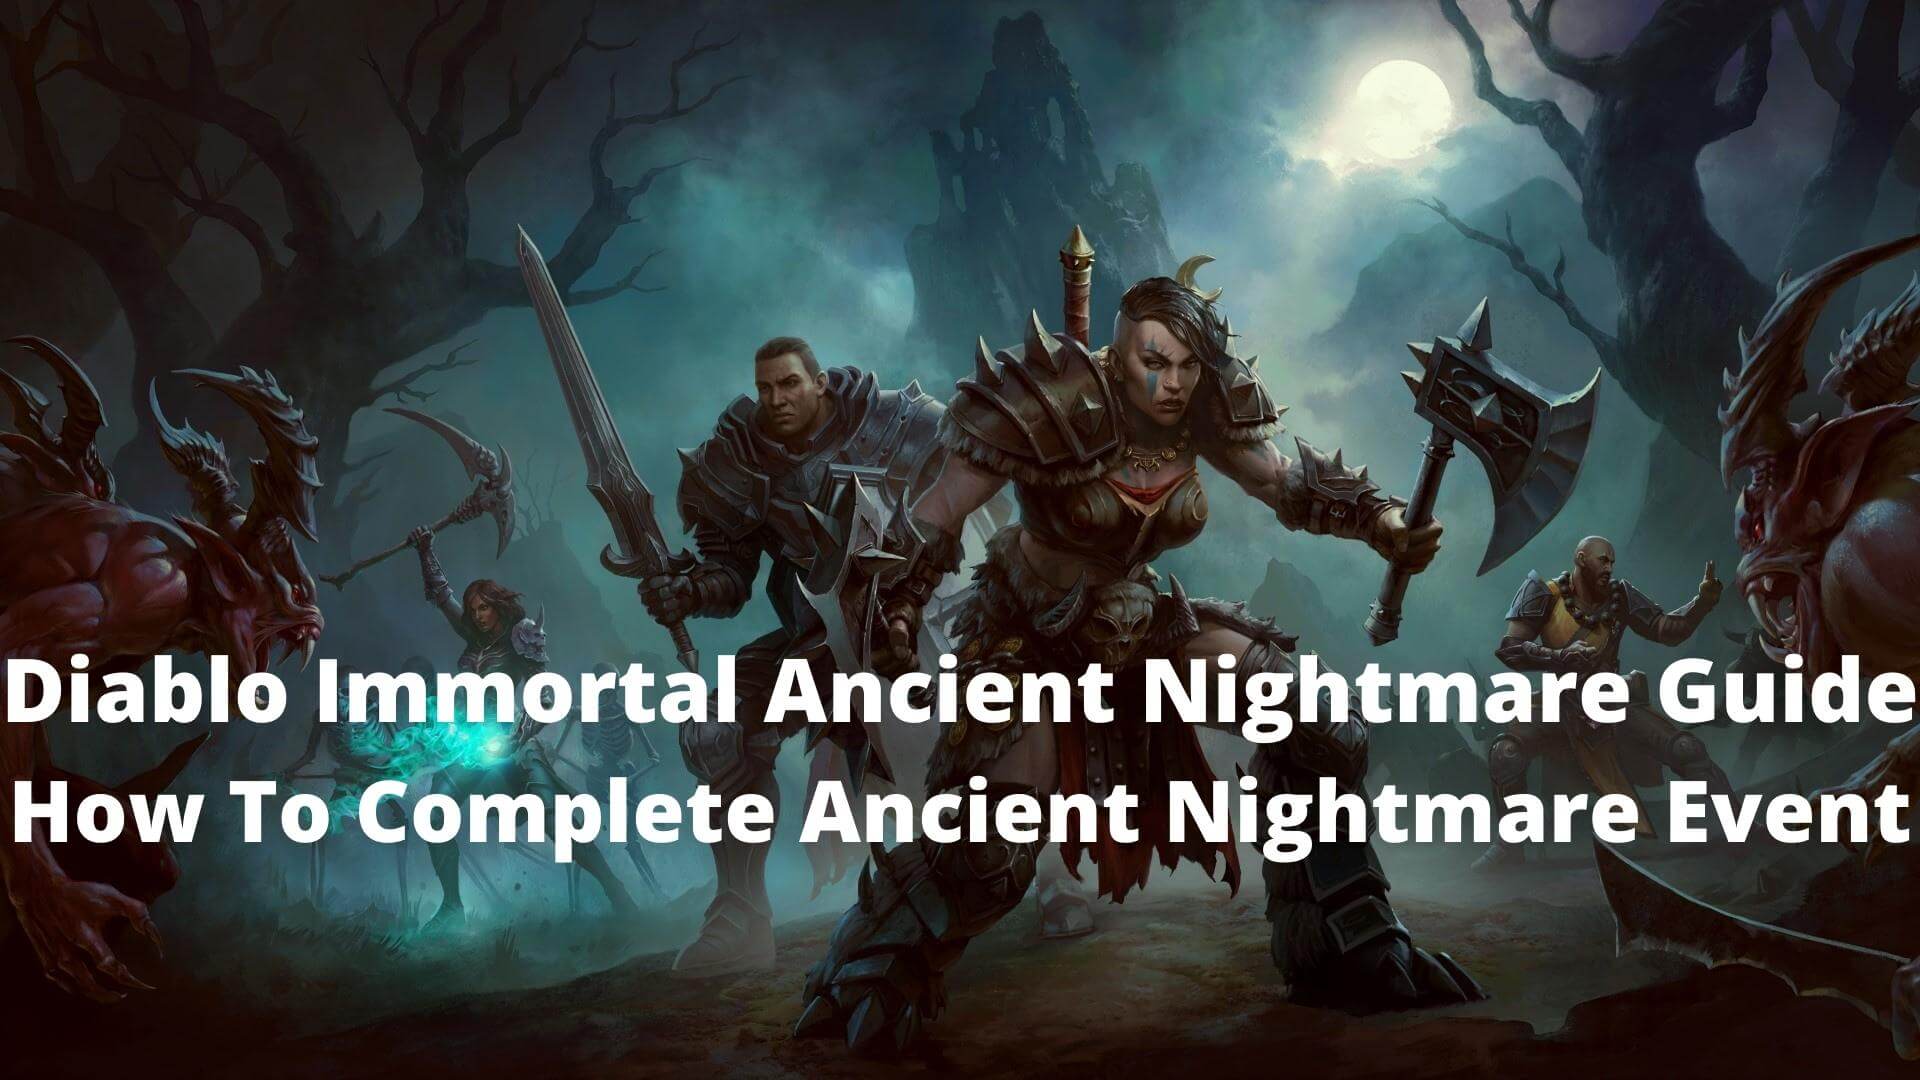 Diablo Immortal Ancient Nightmare Guide - How To Complete Ancient Nightmare Event